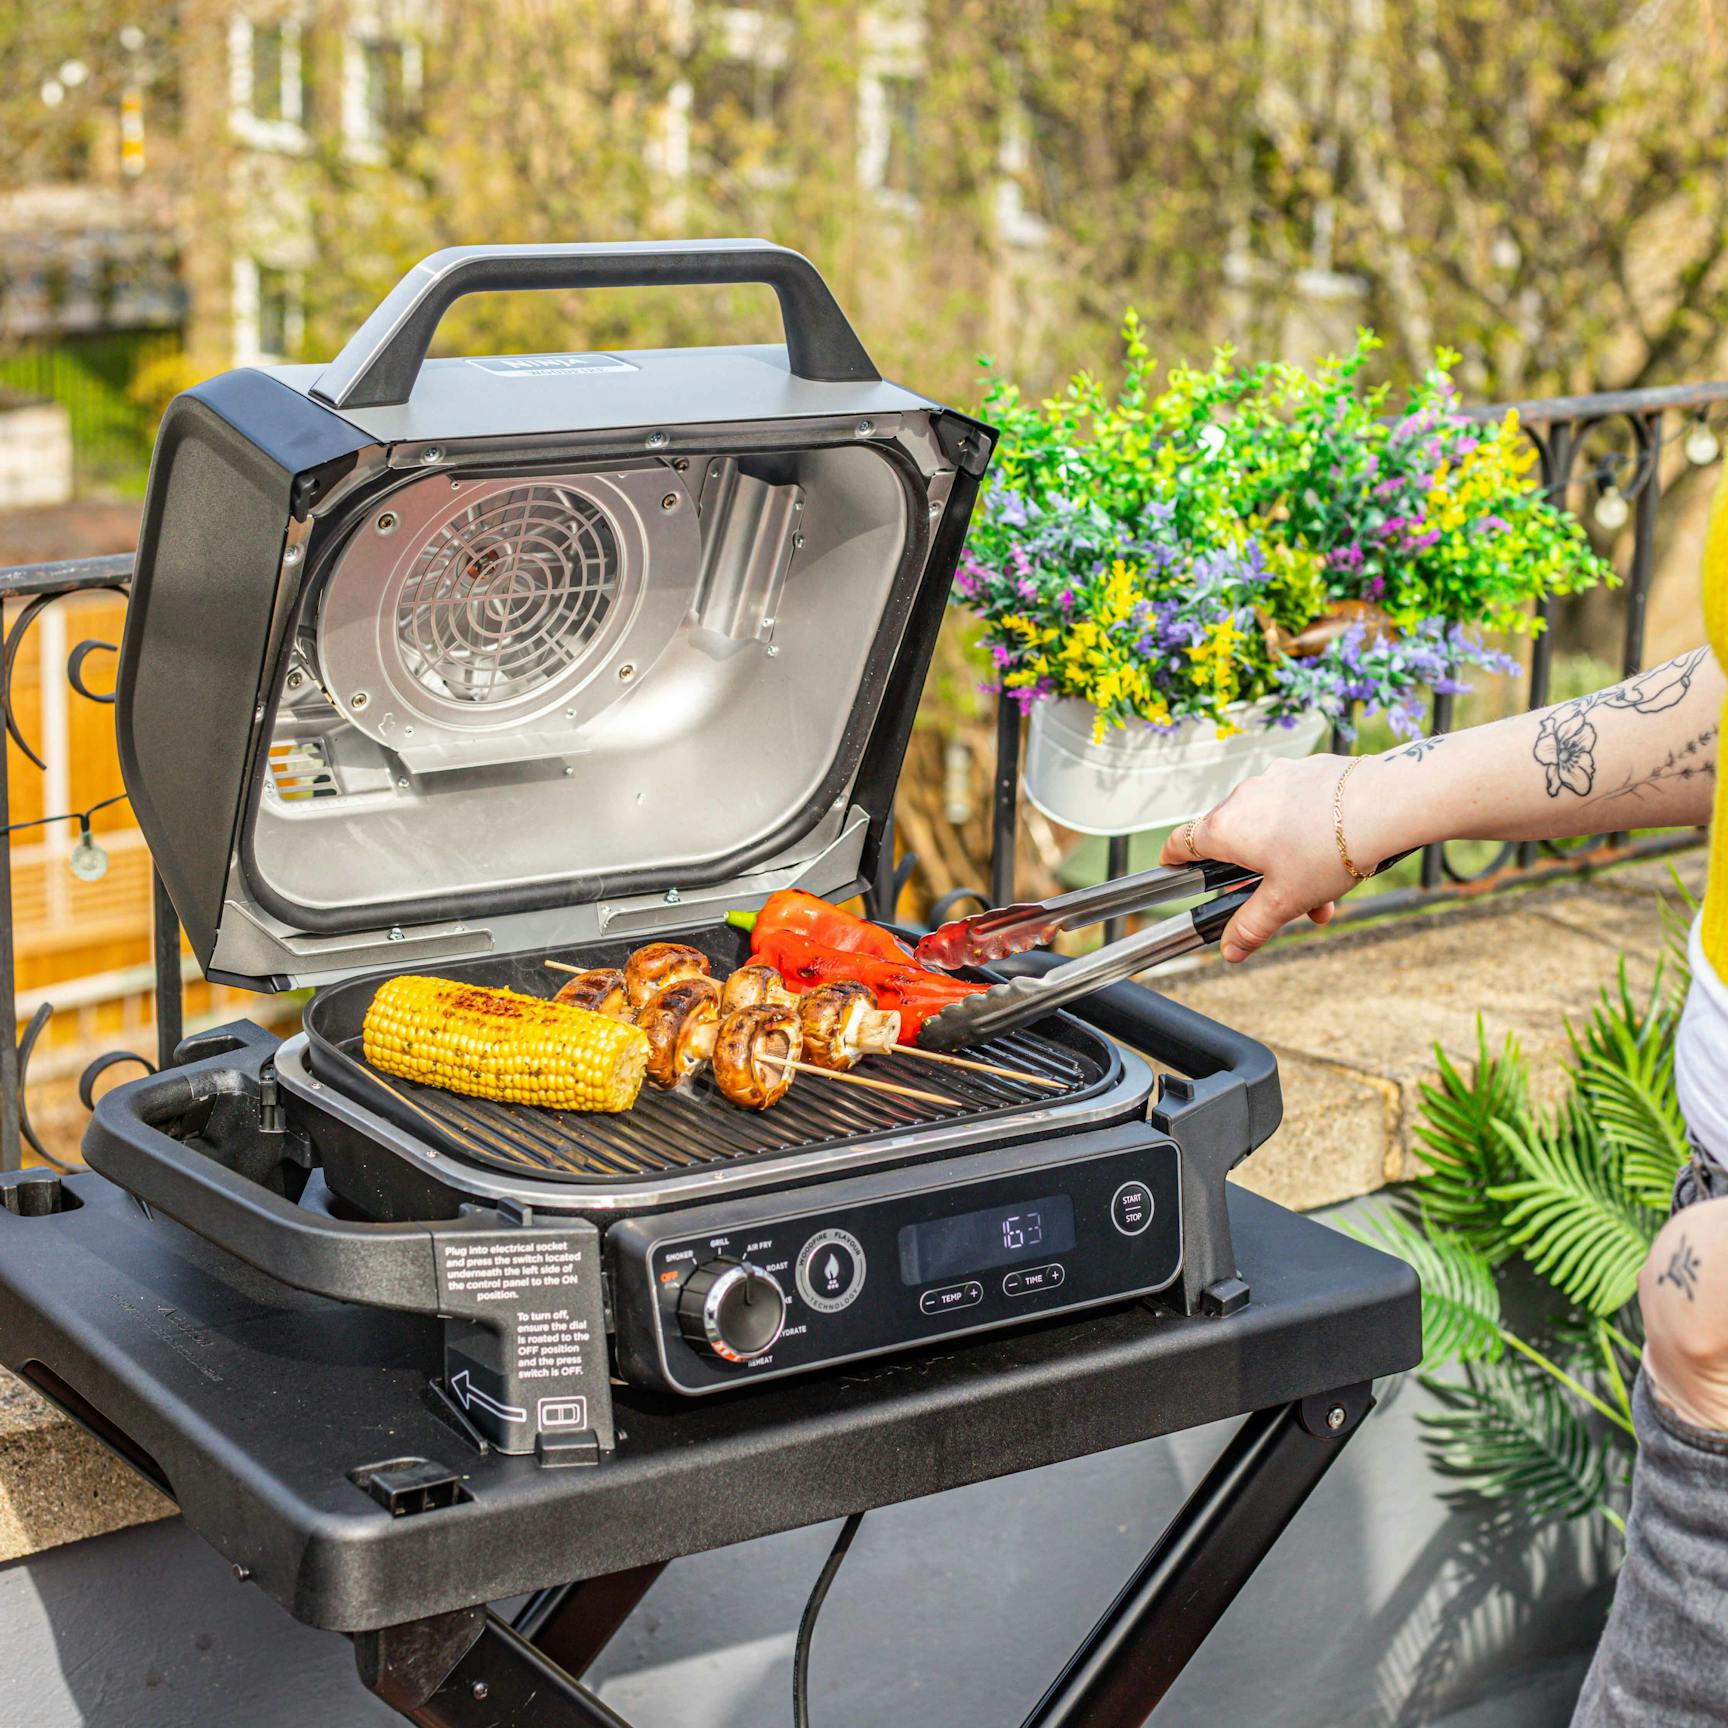 How To Cook On An Electric Barbecue 3